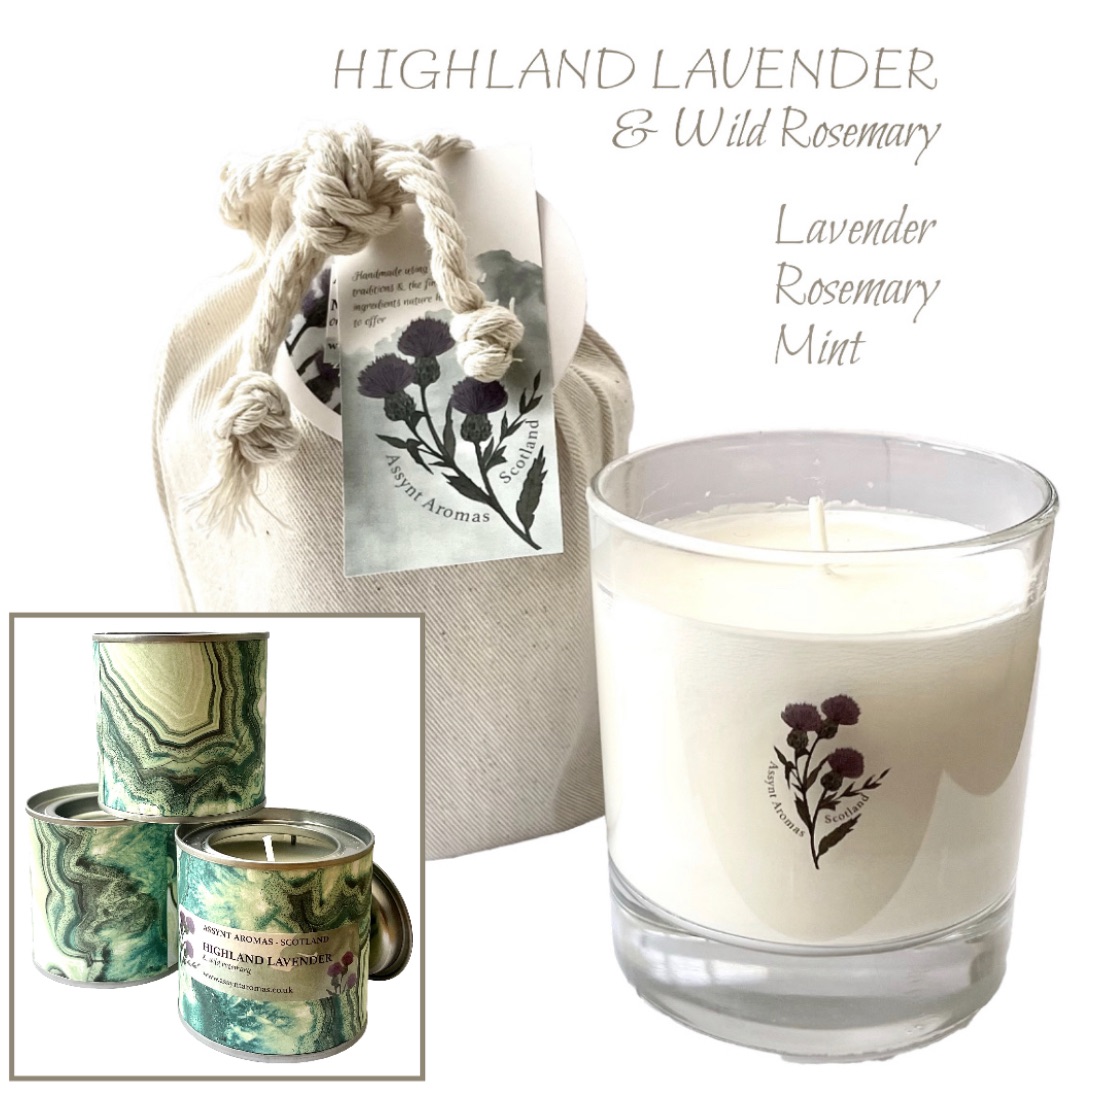 Highland Lavender & Wild Rosemary - natural essence plant wax candle with l